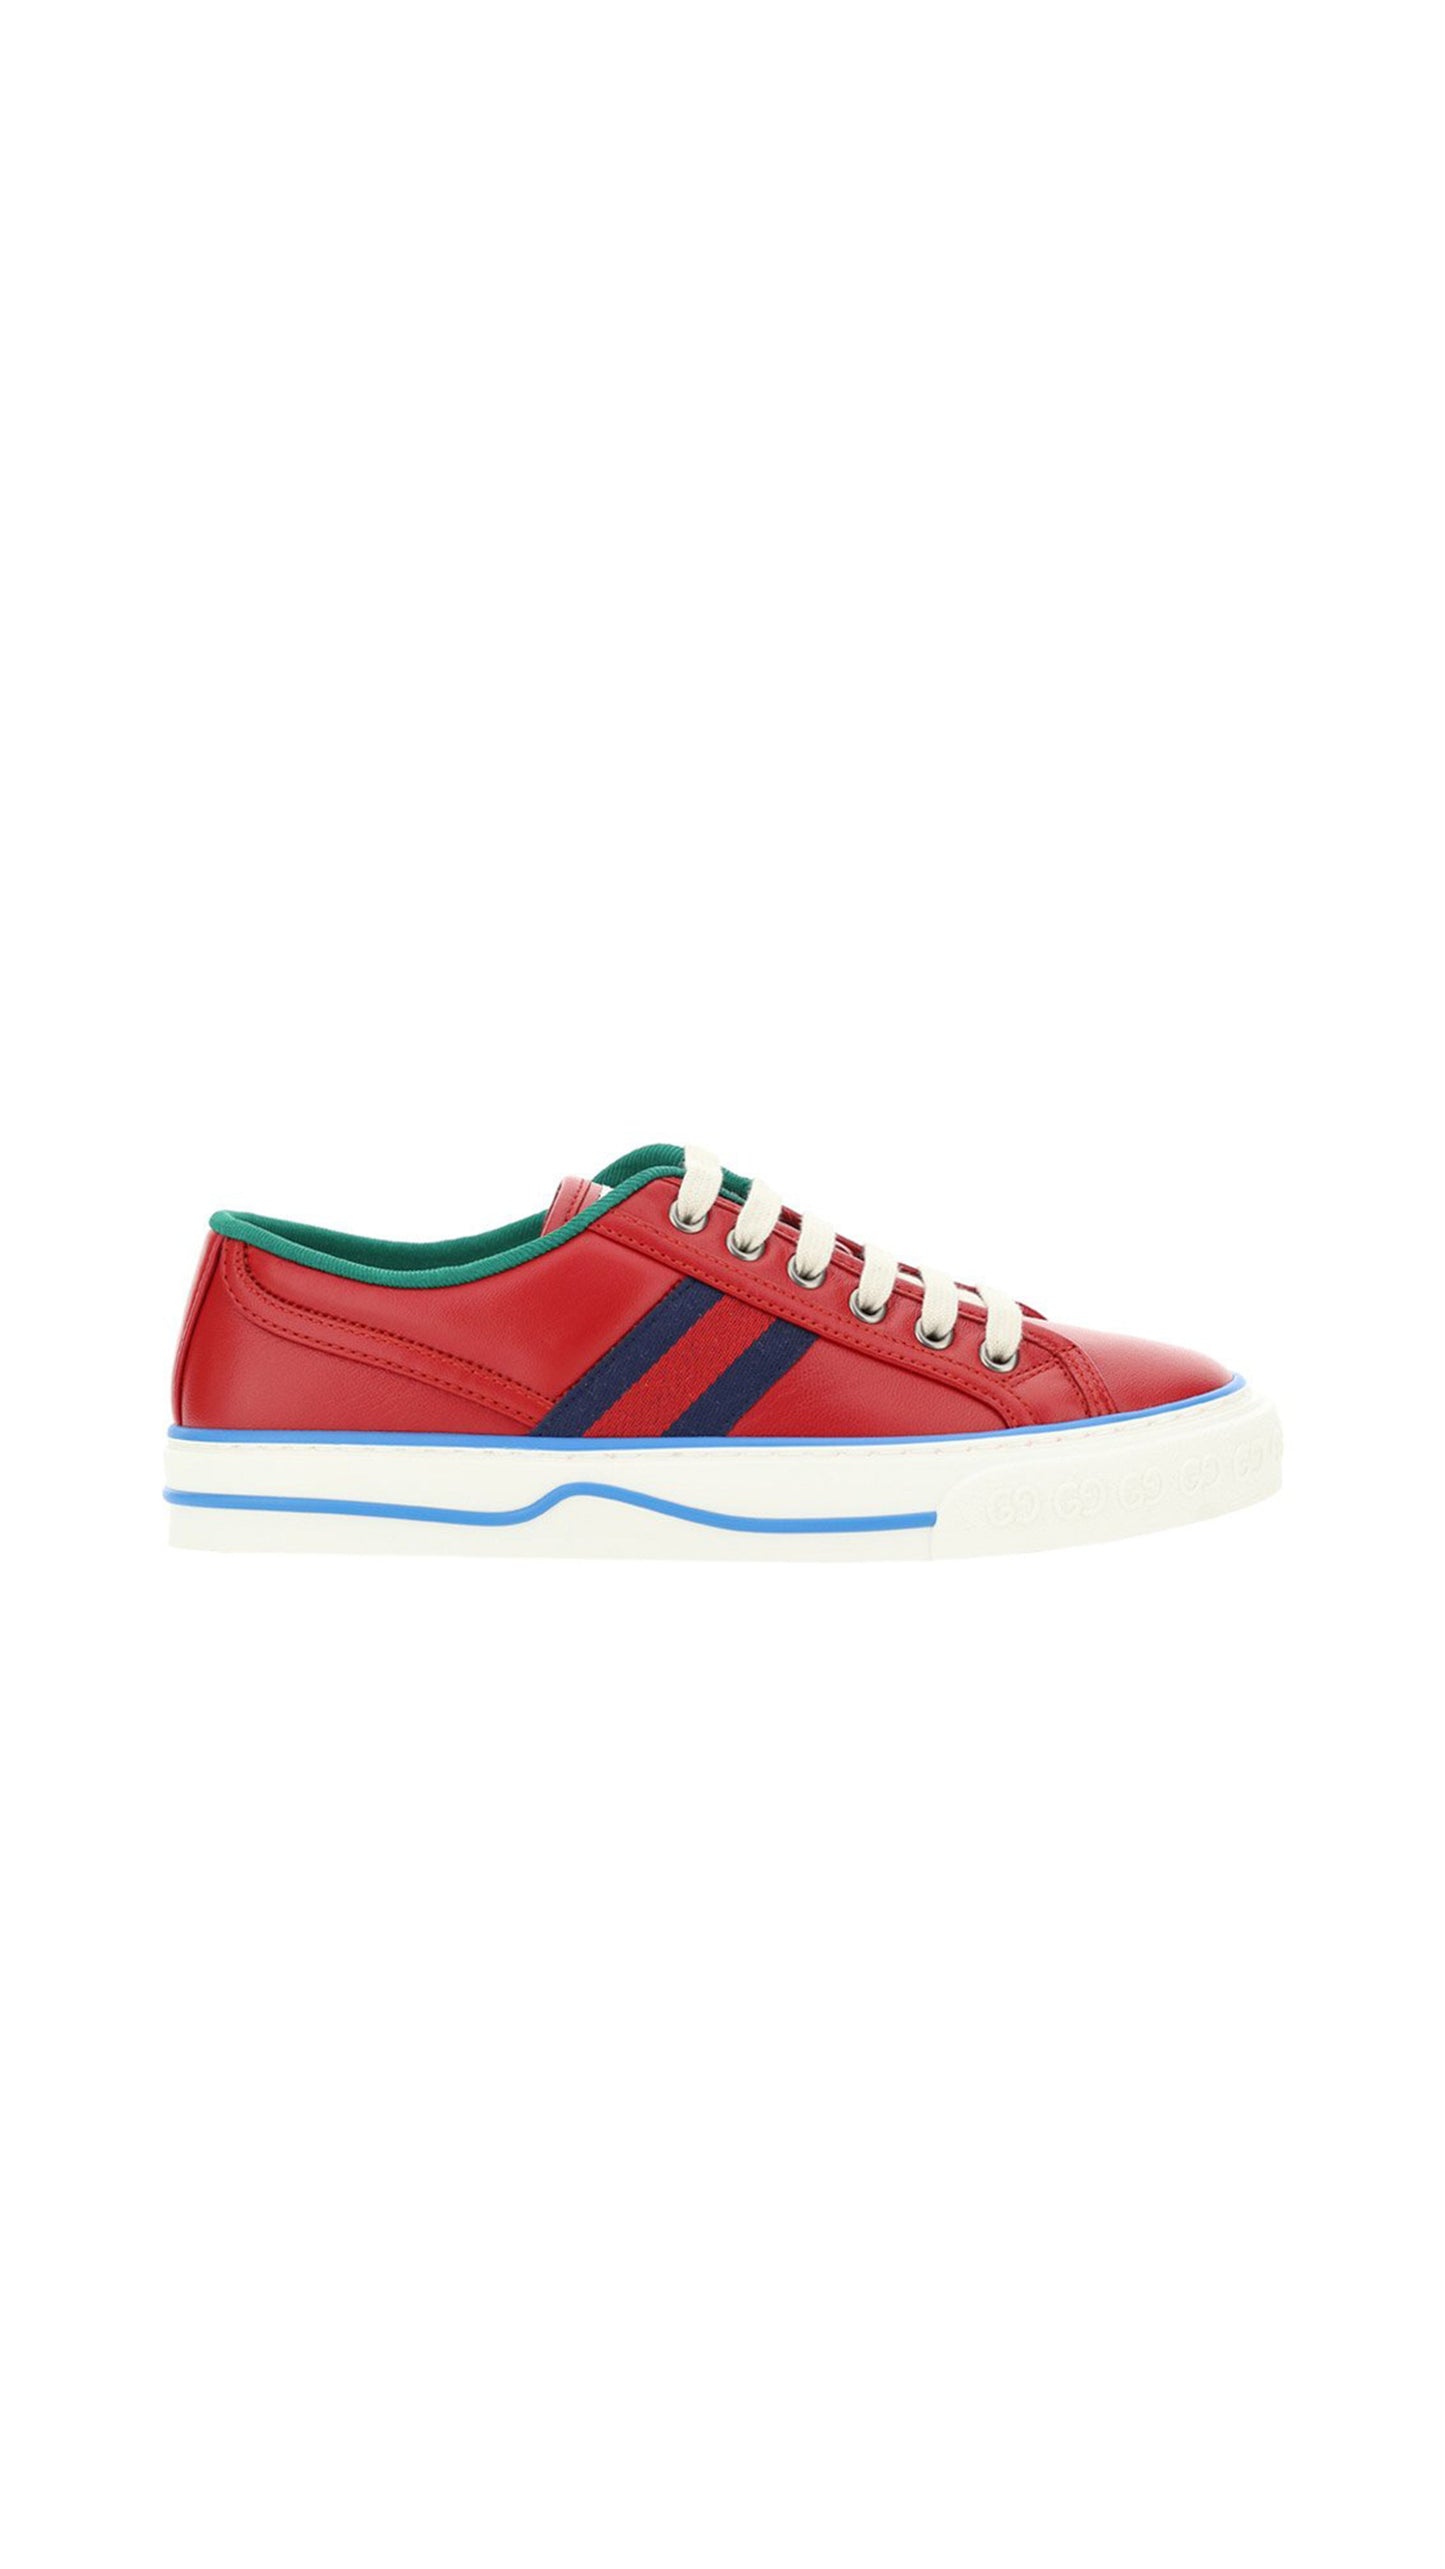 Gucci Tennis 1977 Sneakers - Red